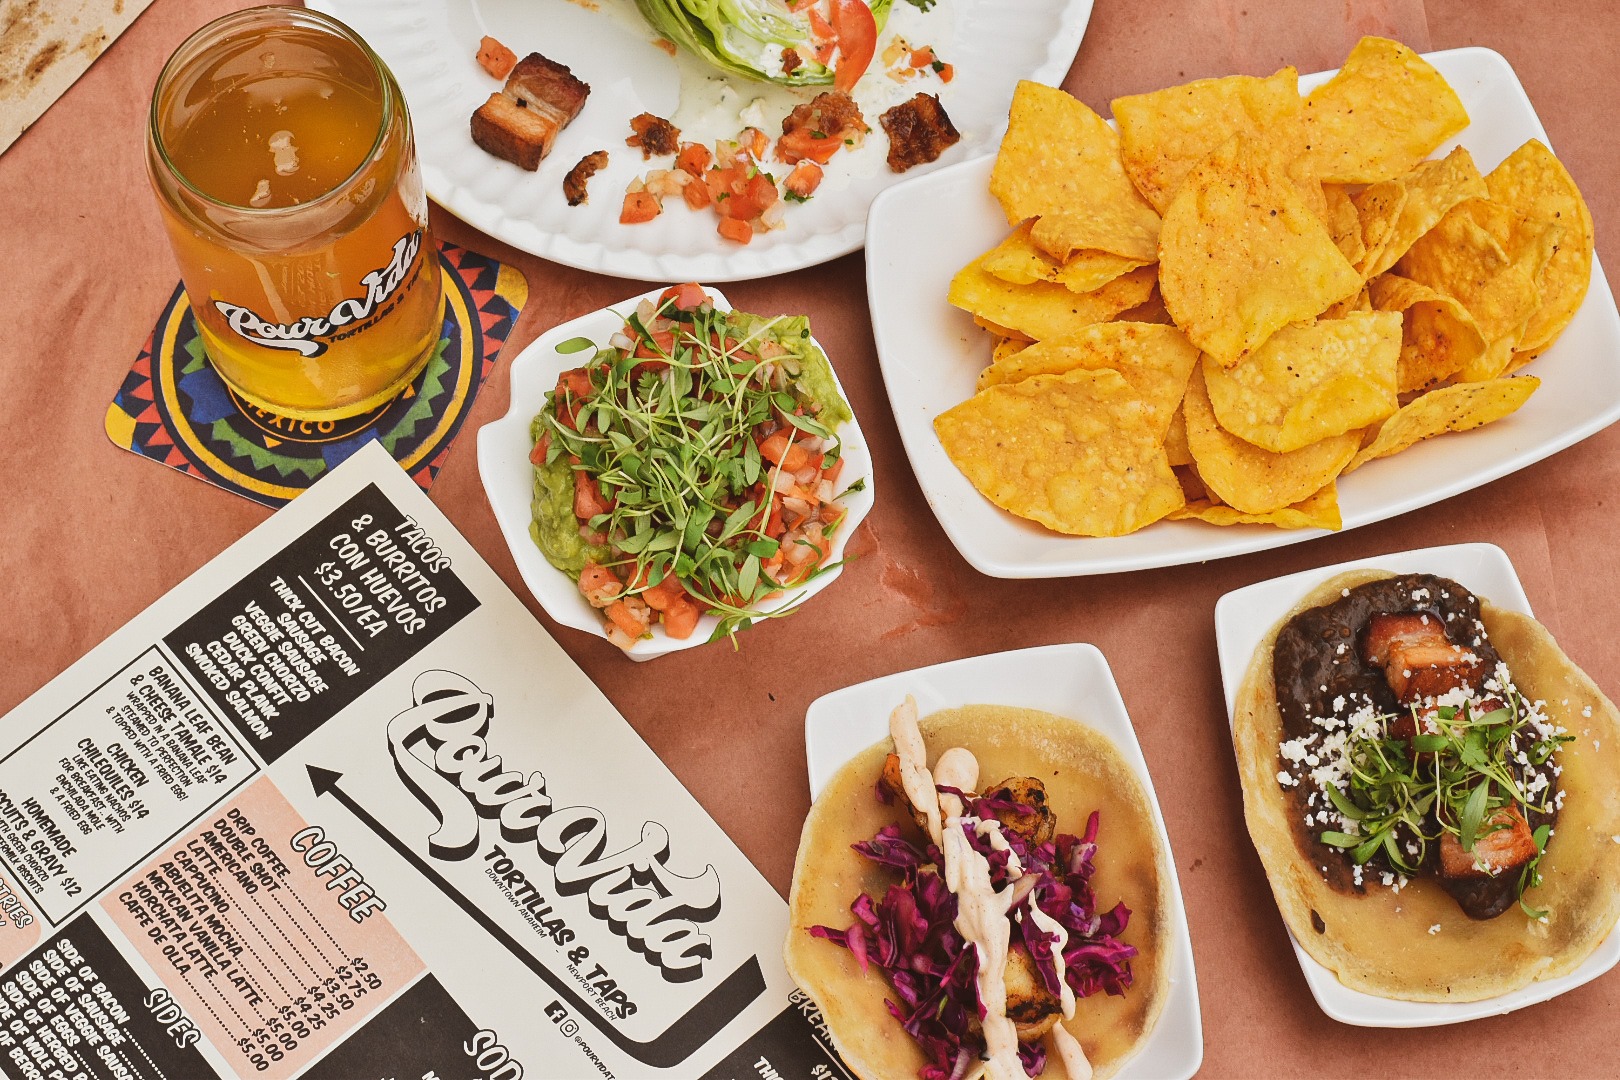 An overhead shot of tacos, chips, and a beer and menu.